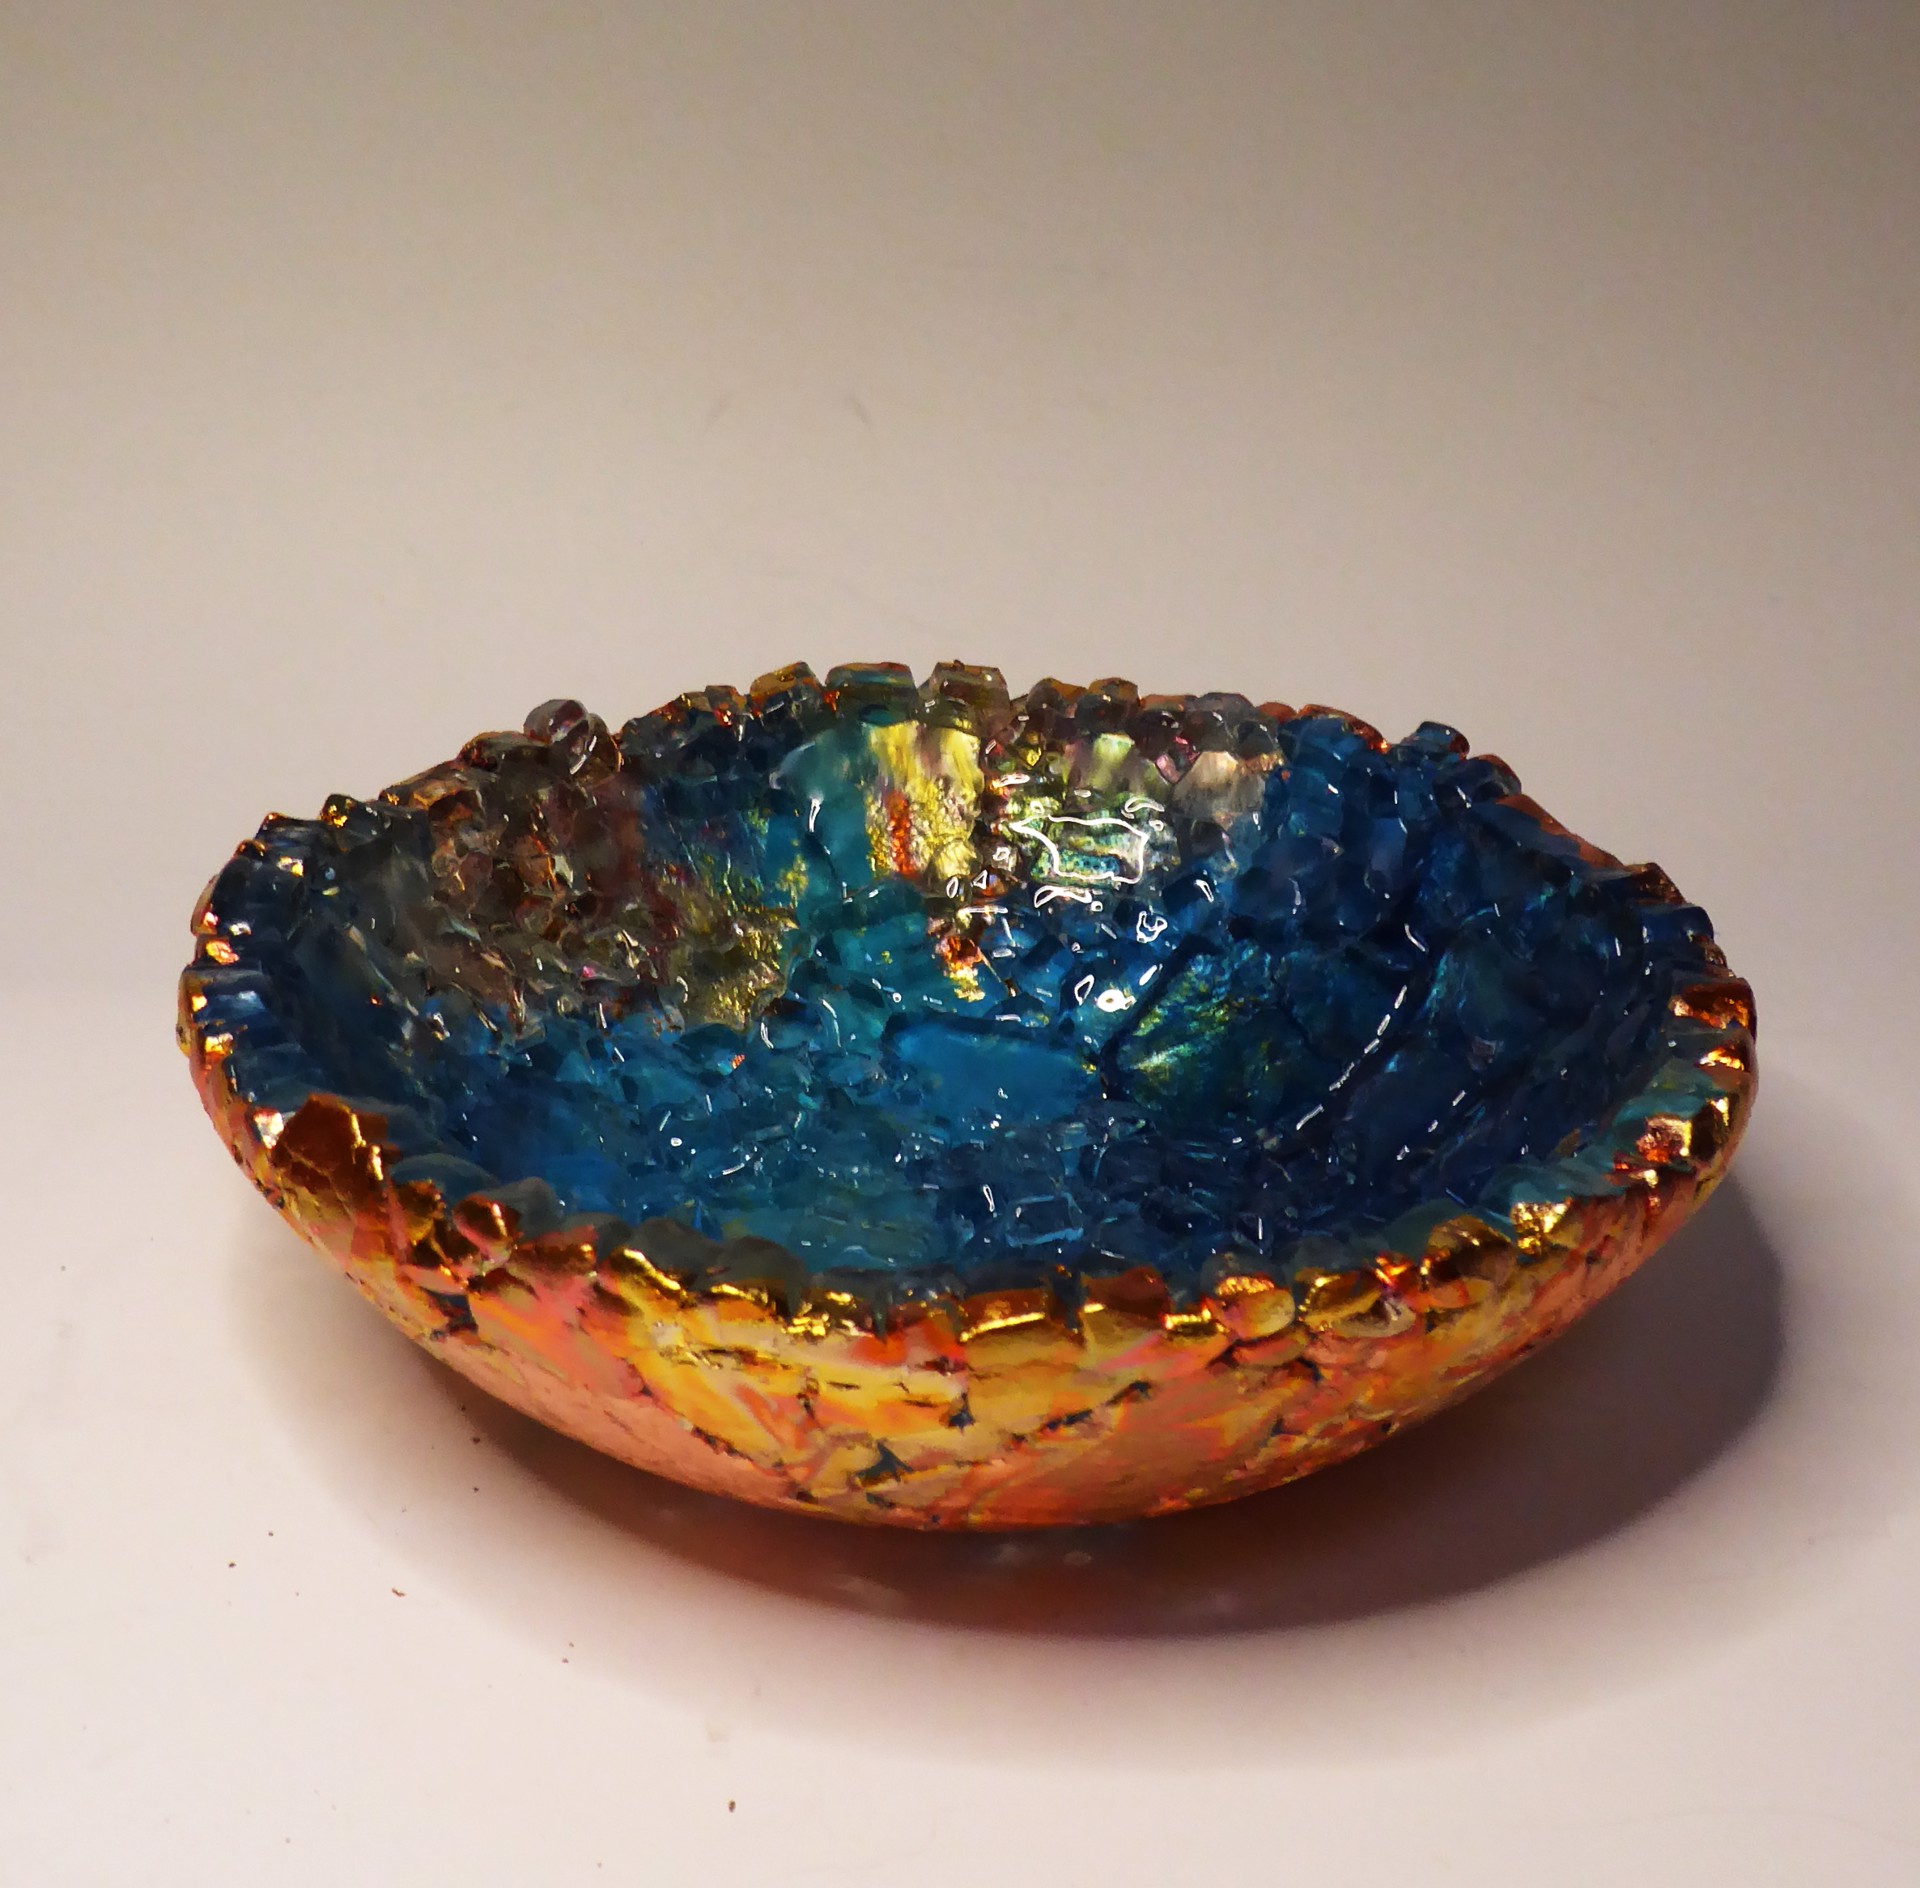 Blue and Teal Vessel by Mira Woodworth